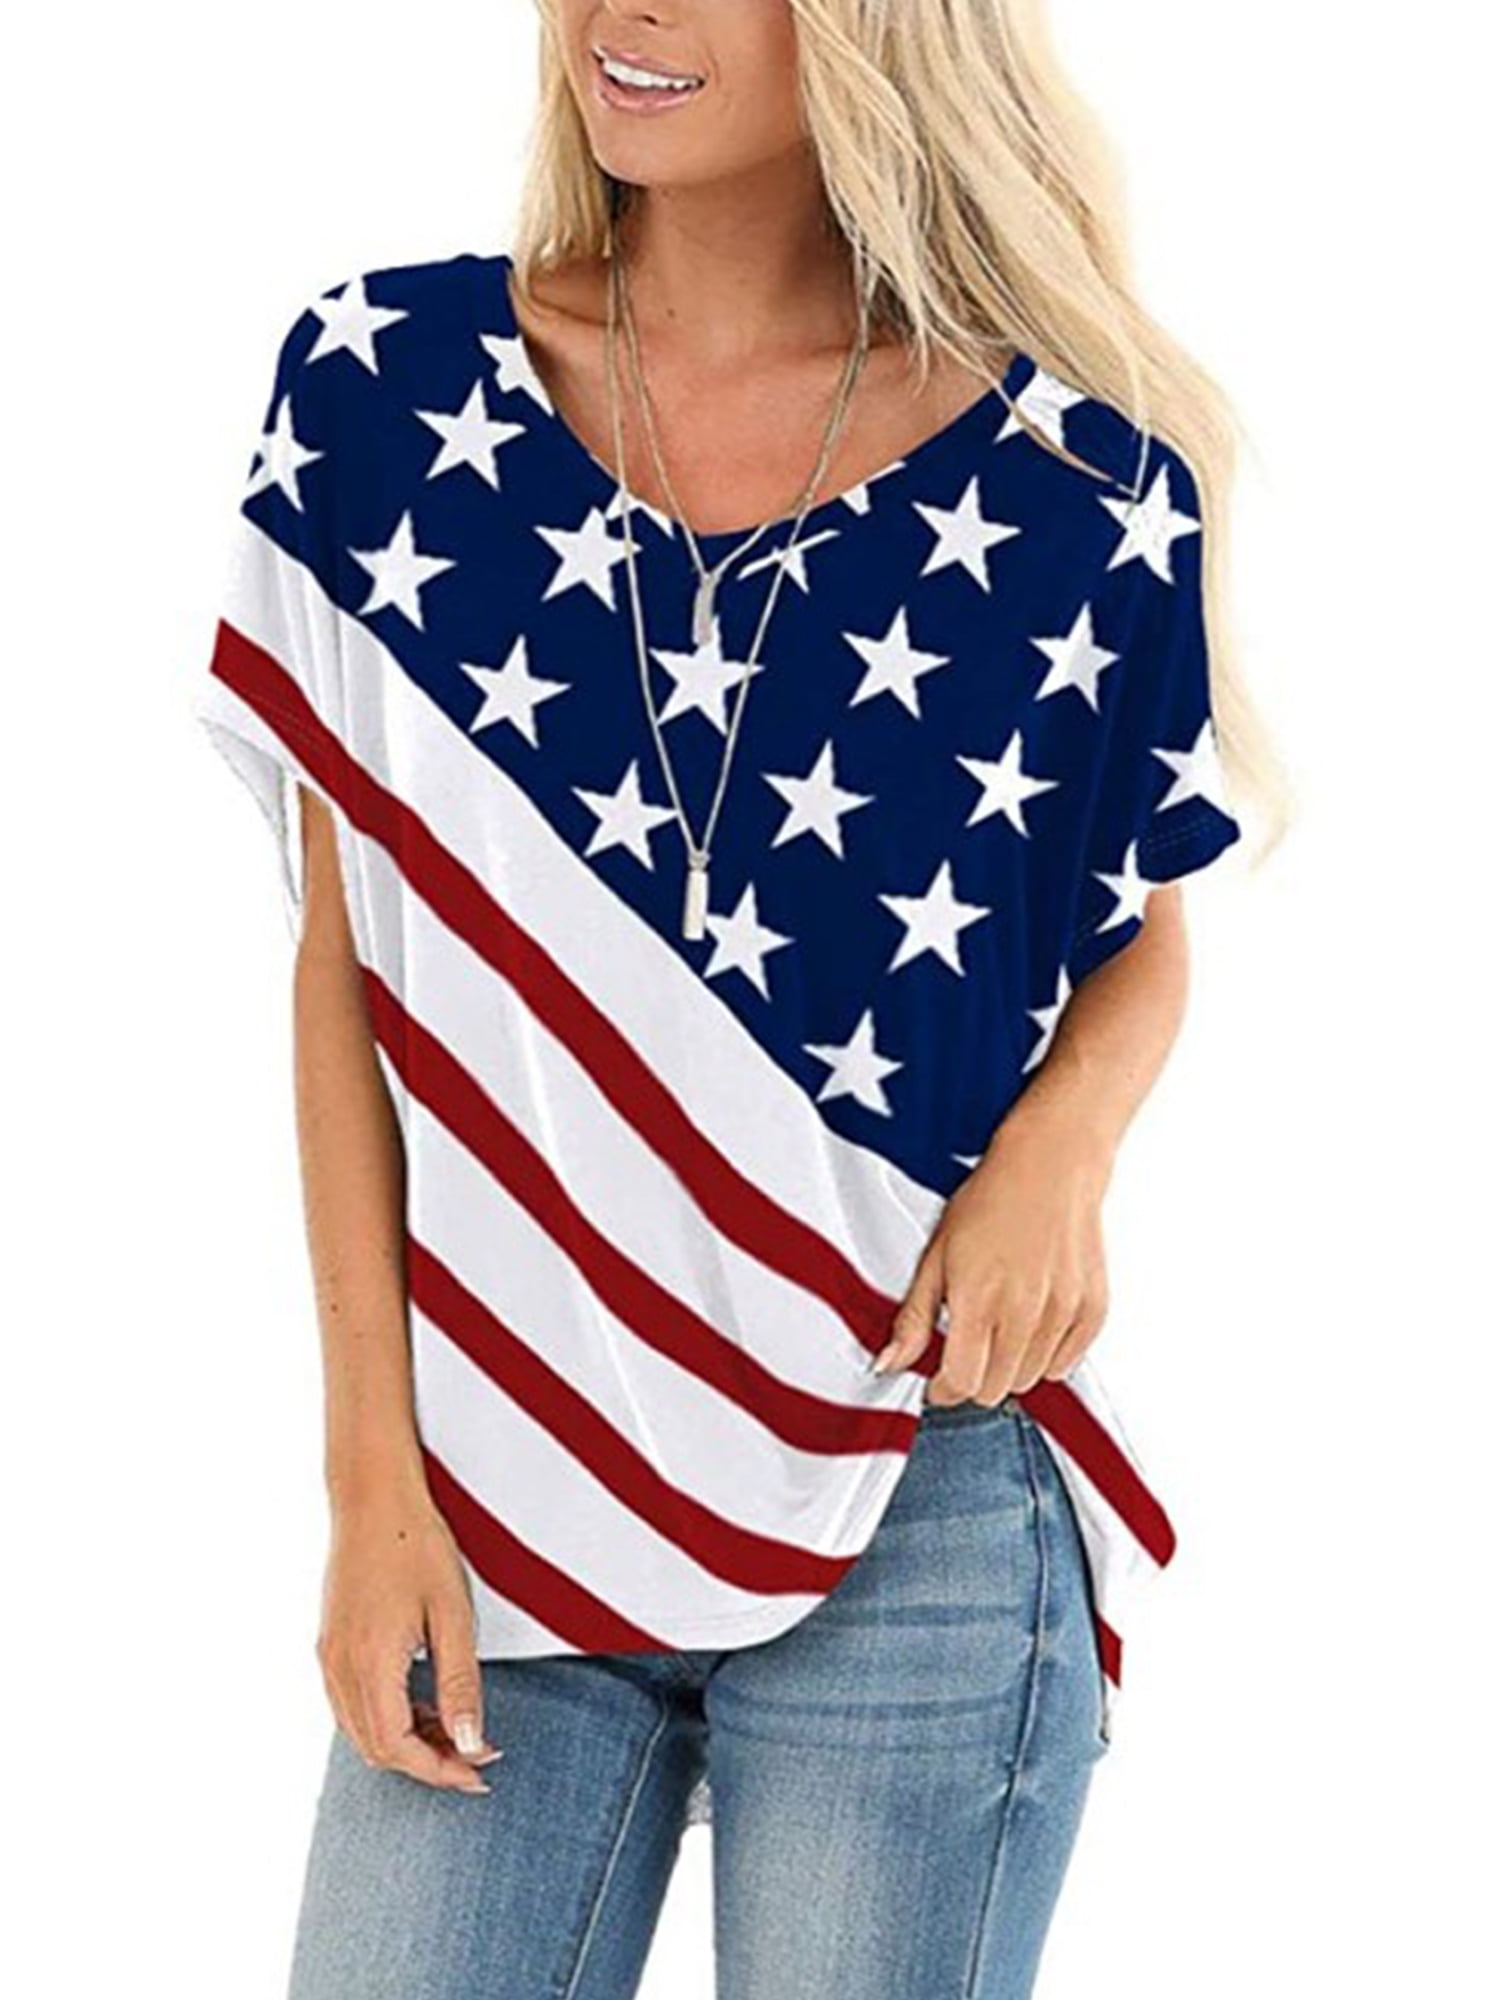 Allywit Independence Day Patriotic Tee Shirt Tops for Women Short Sleeve American Flag Back Print T-Shirt